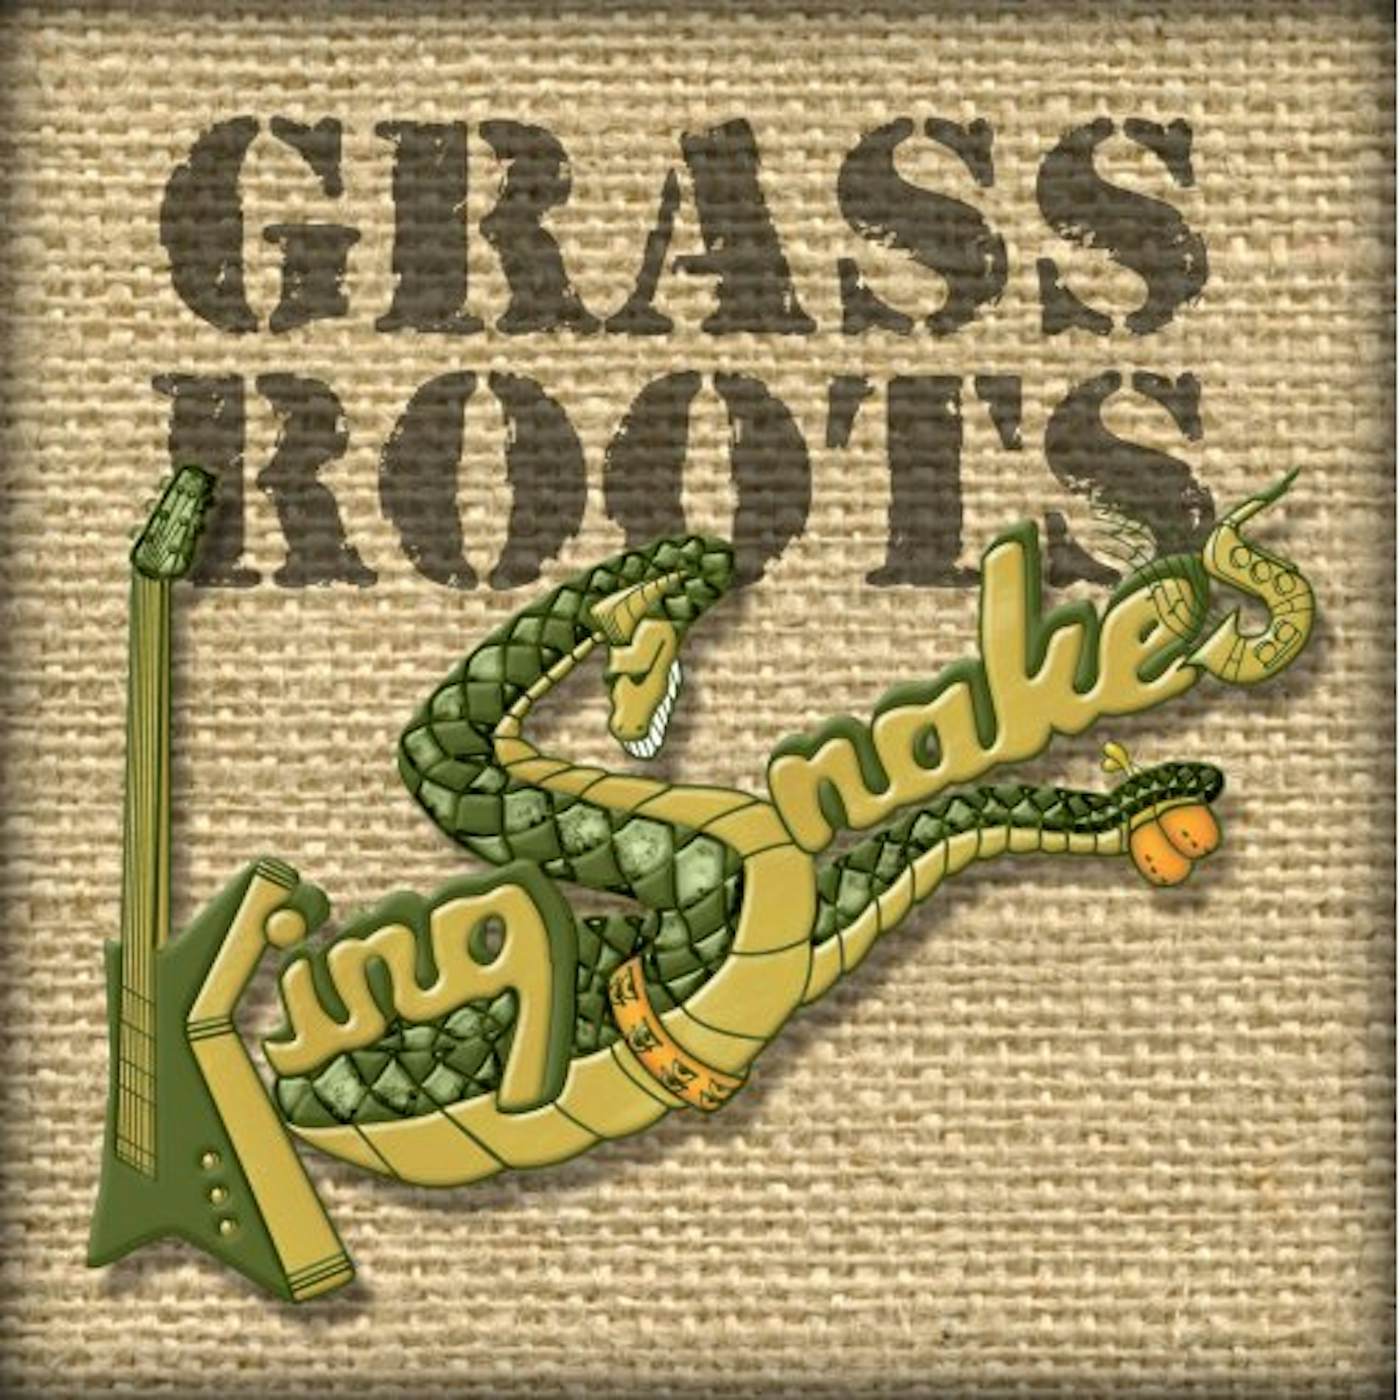 The Kingsnakes GRASSROOTS CD